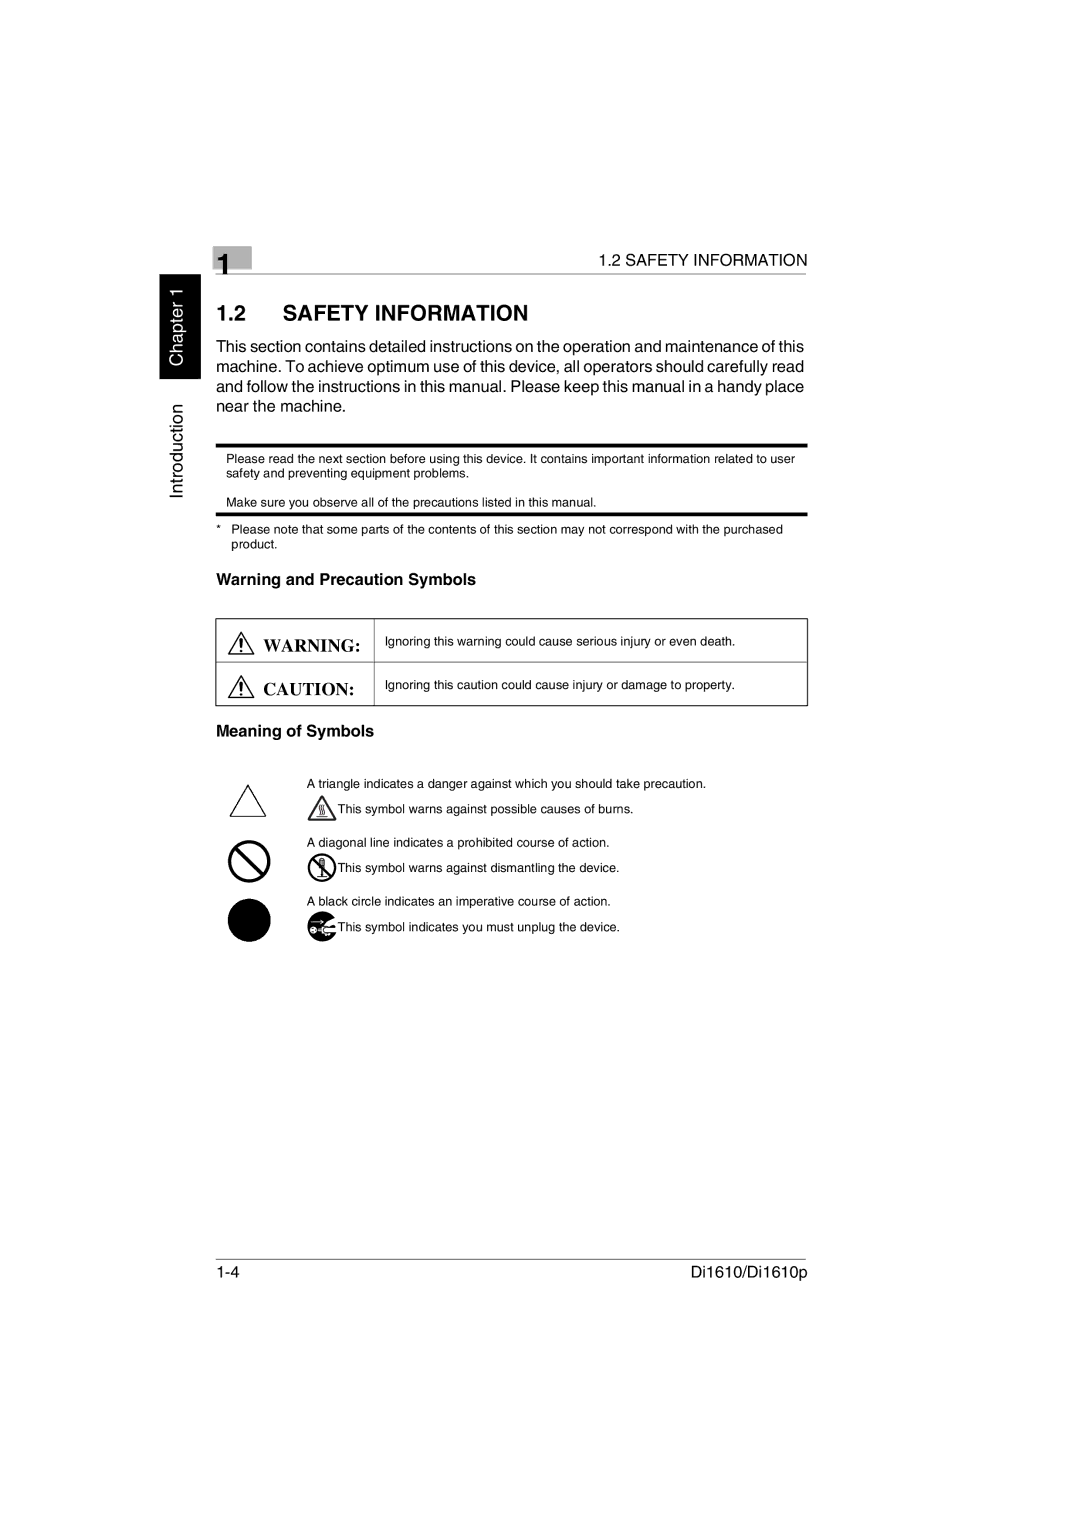 Konica Minolta Di1610p user manual Safety Information, Meaning of Symbols 